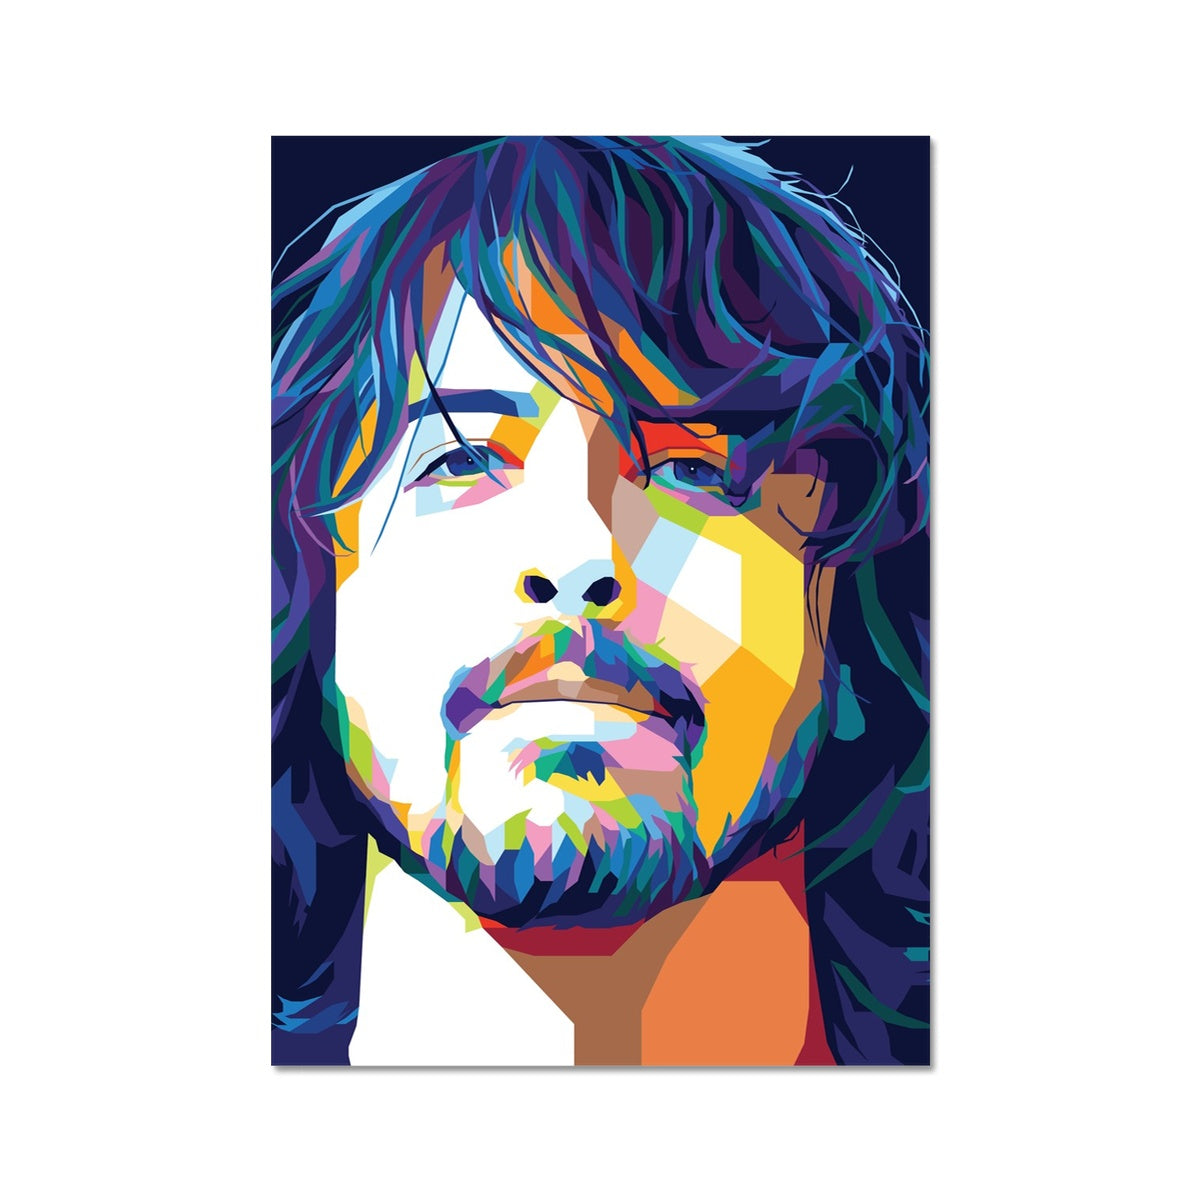 DAVE GROHL - Nirvana, Foo Fighters Fine Art Print